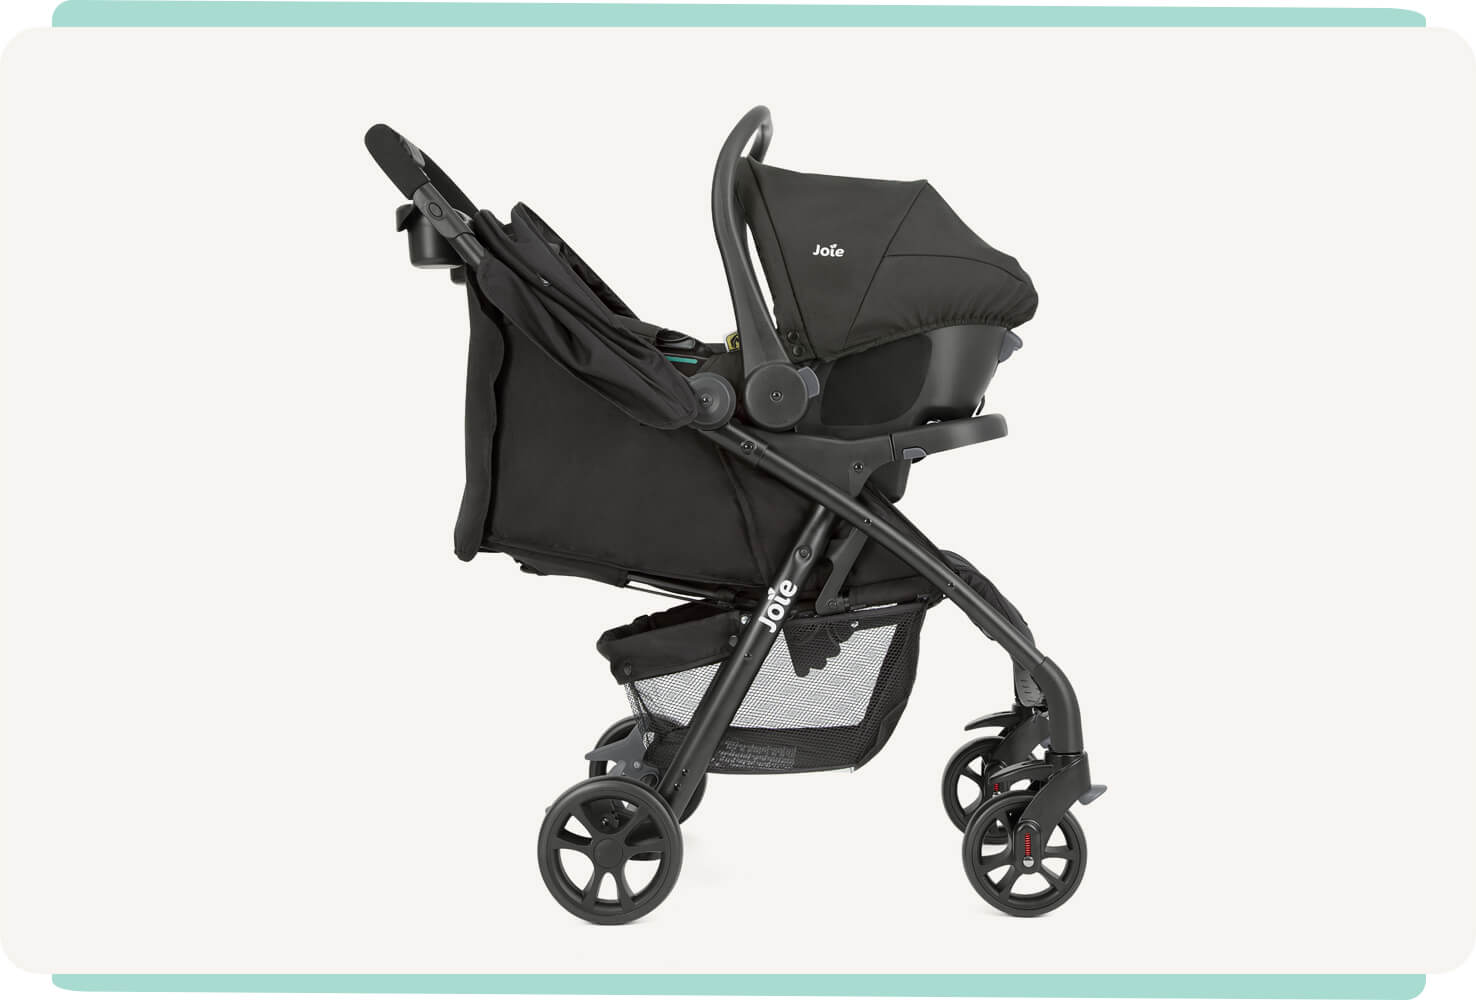  Joie i-Juva infant car seat on a stroller base to demonstrate travel system compatability.